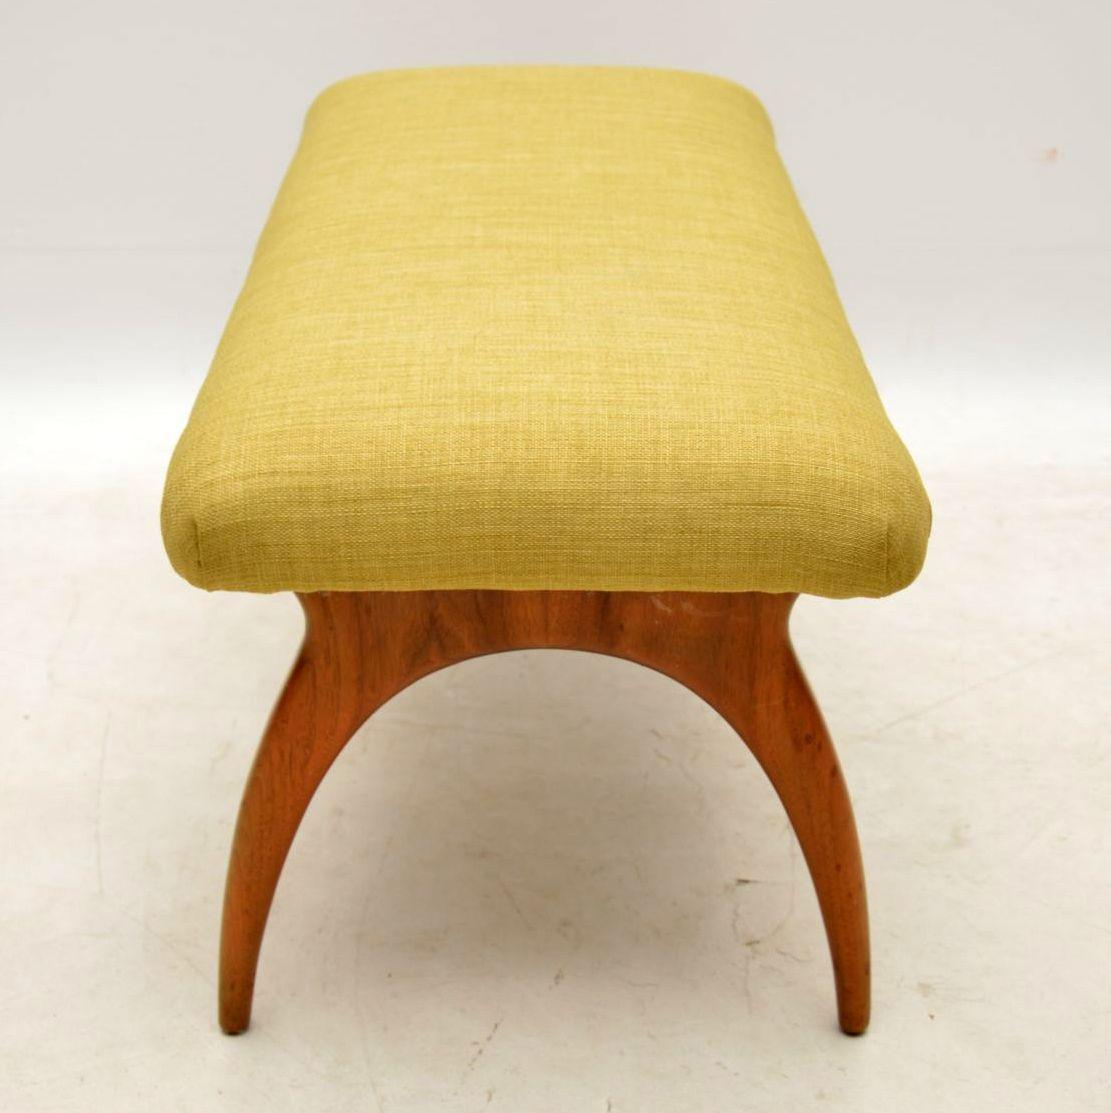 A beautifully styled and very well made vintage foot stool, this was made in Italy and dates from the 1960s. It’s very well made with a solid walnut frame, which is clean, sturdy and sound, with only some extremely minor surface wear. We have had